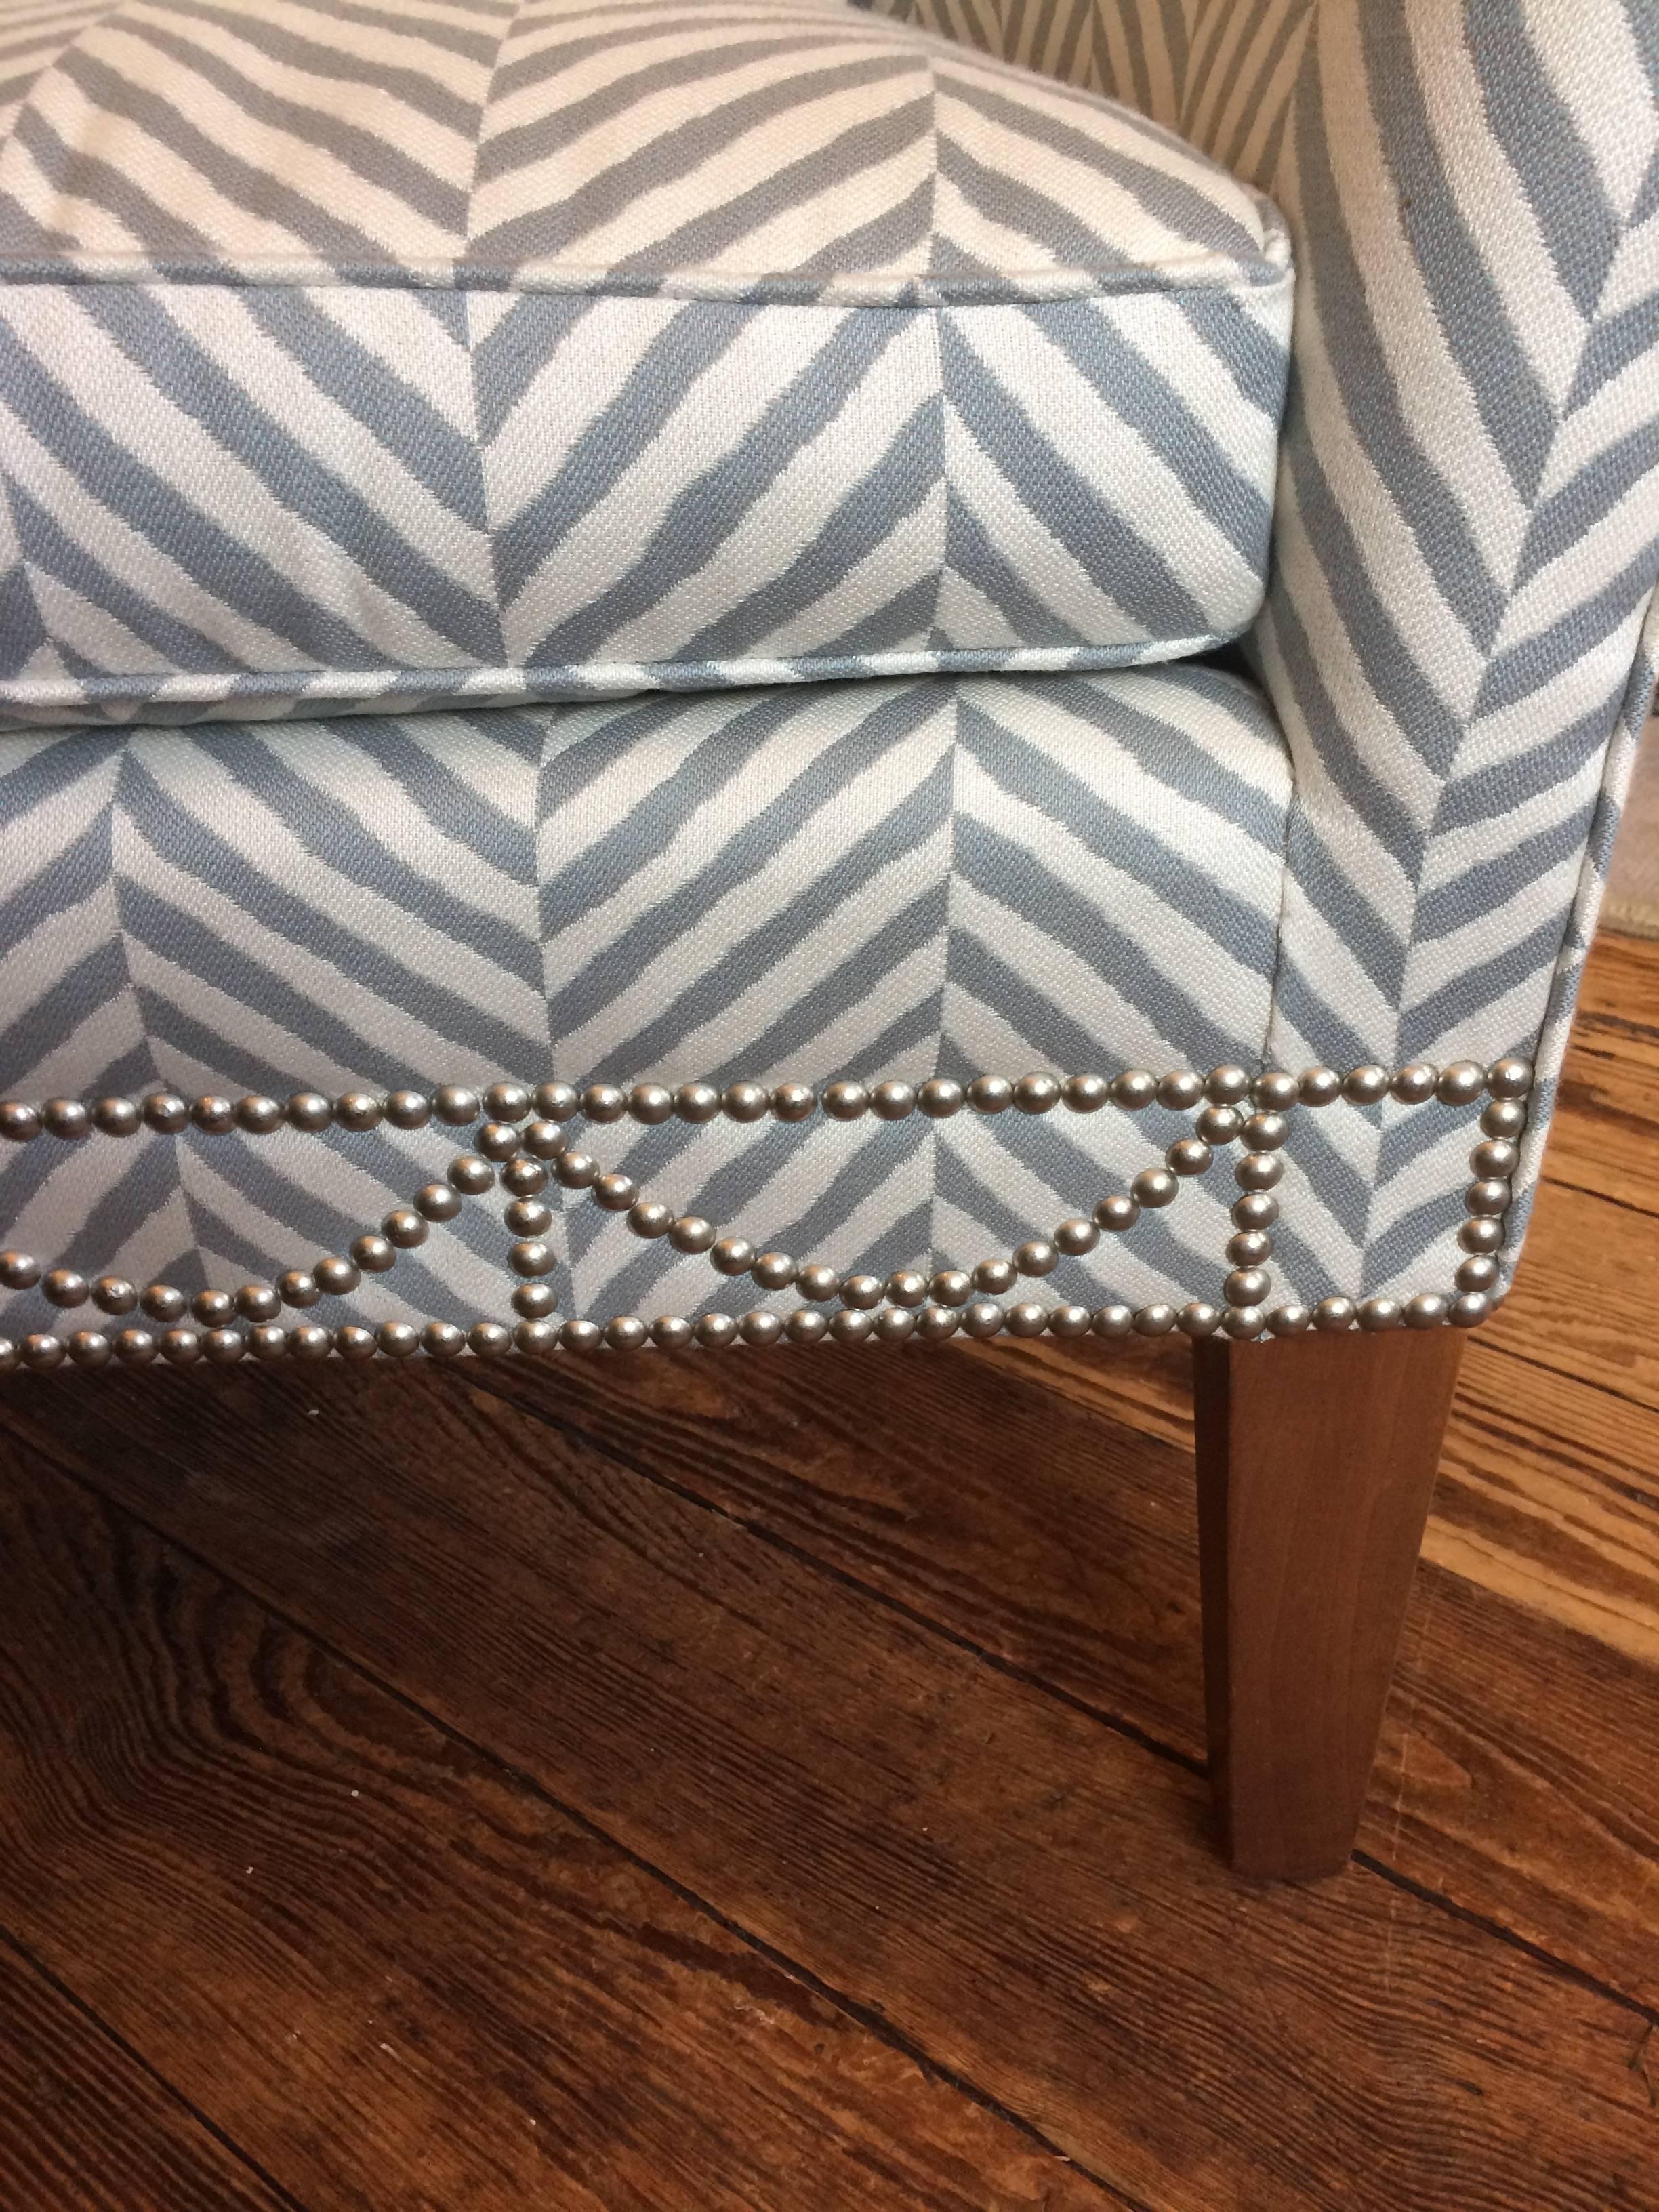 Sophisticated custom club chair having tailored lines, grey and white chevron upholstery and finished with nailheads. Cute little custom shaped back pillow included.